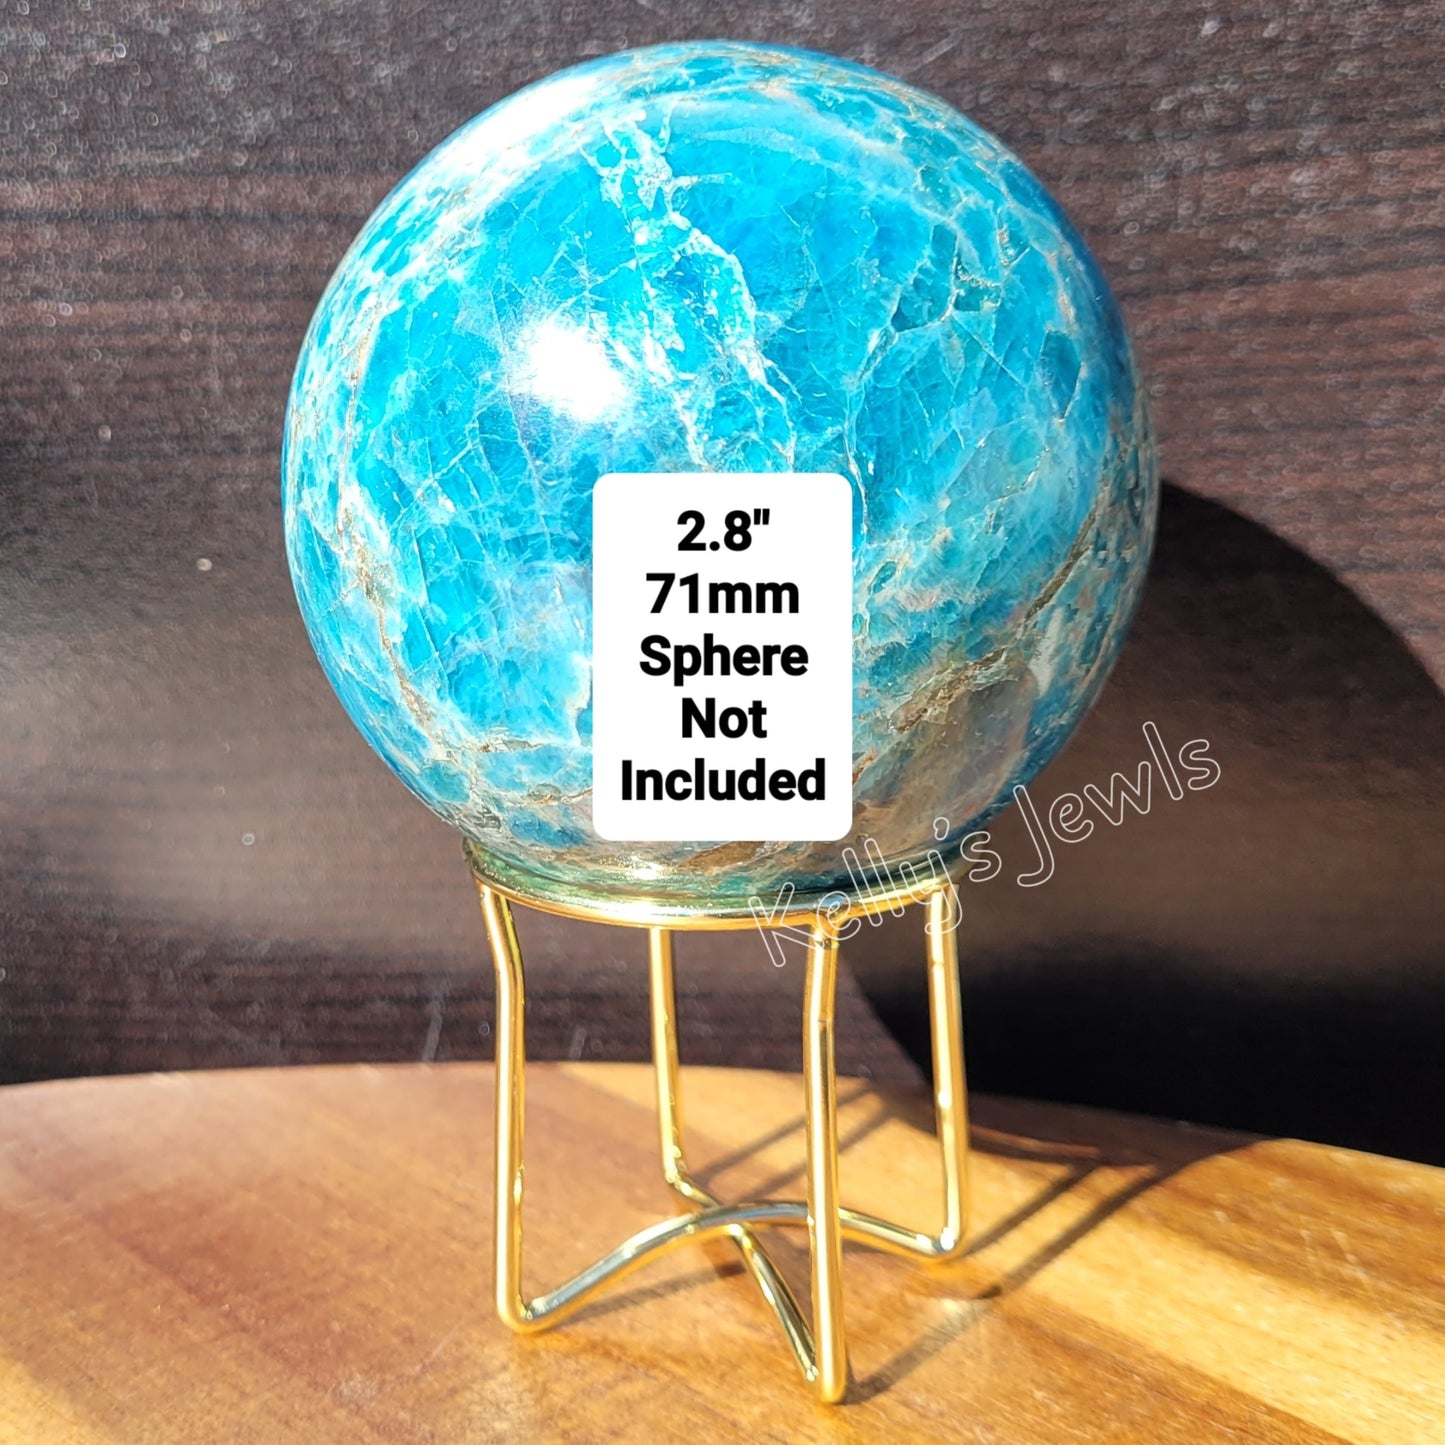 Simple Metal Sphere Display Stand in Silver or Gold for Spheres 1.9" to 4" (46mm to 102mm)